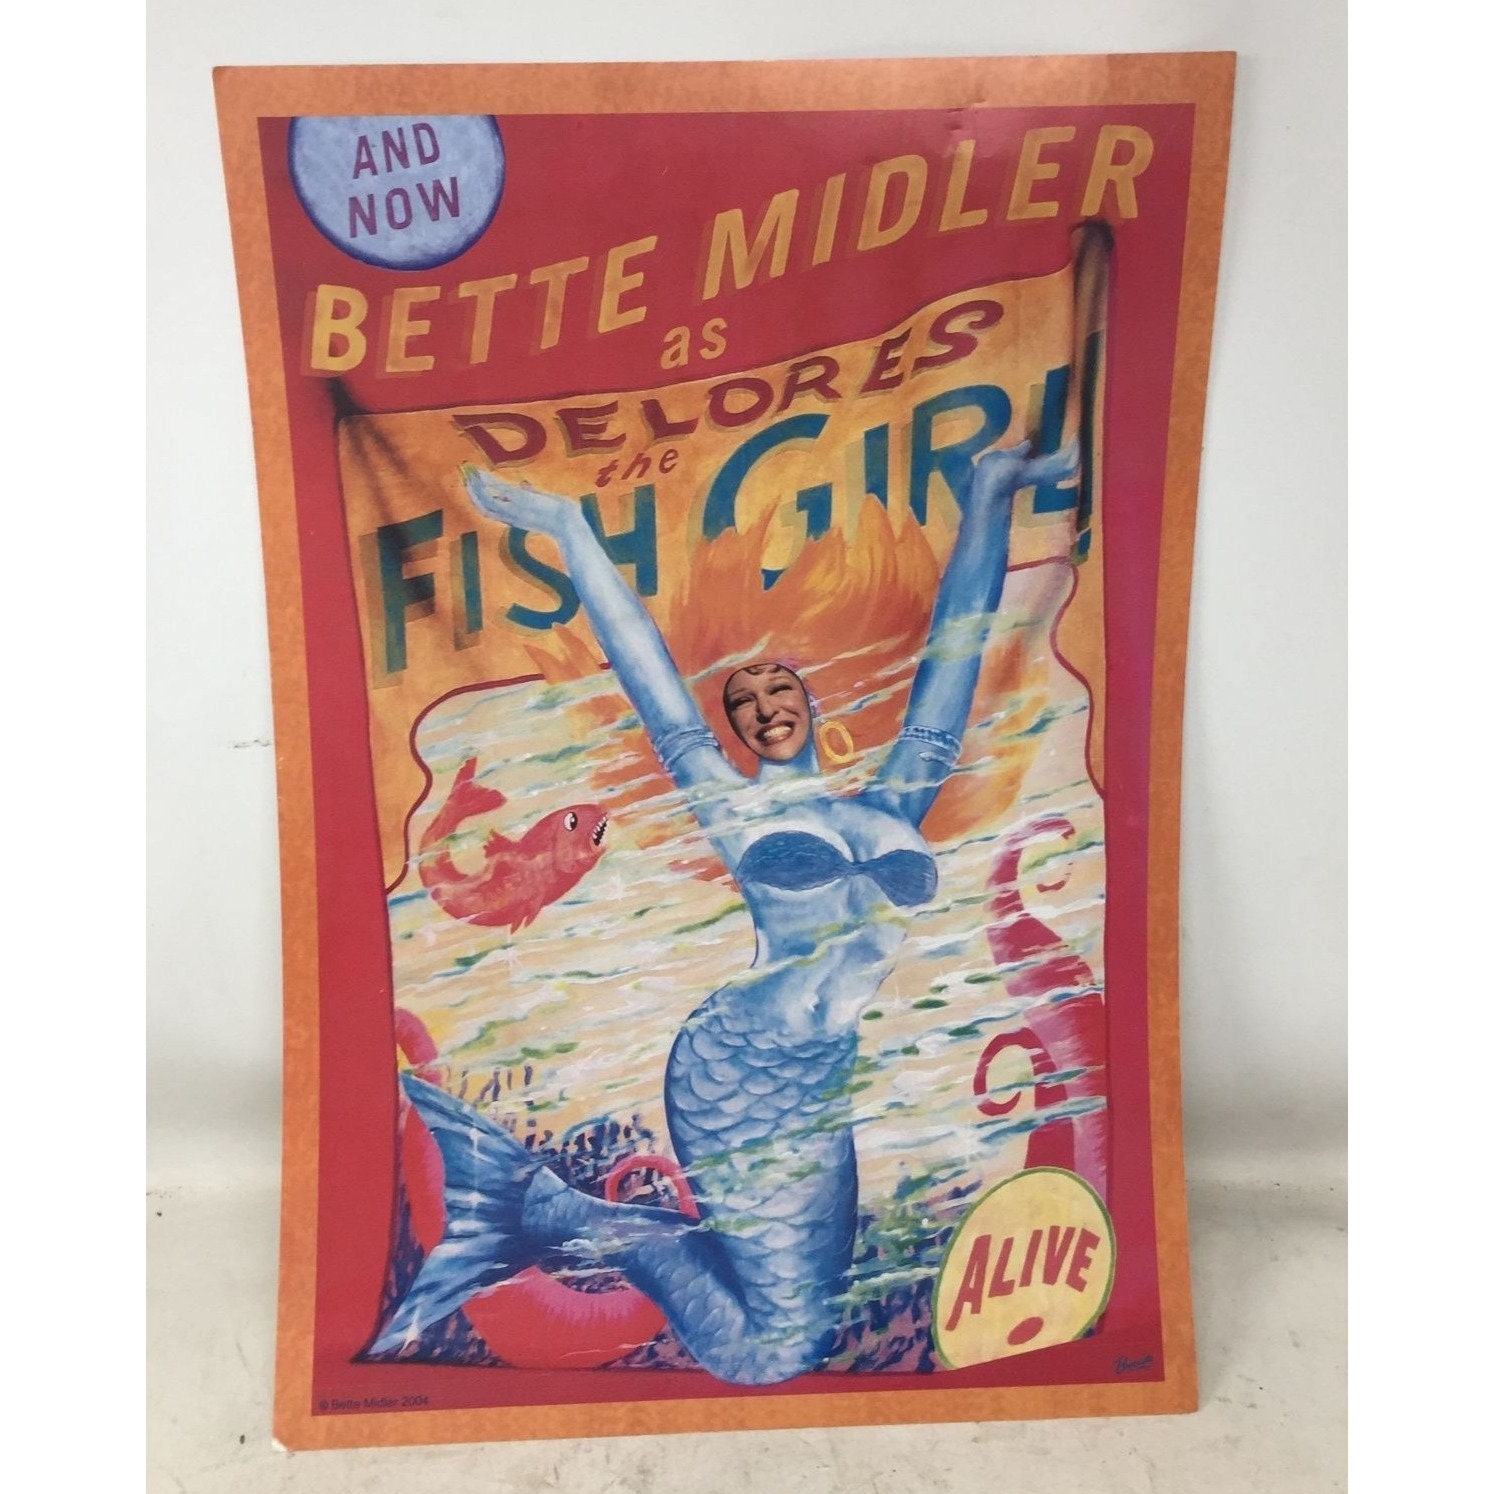 Vintage 2004 Bette Midler as Delores the Fish Girl Concert Poster 19x13  Inches 